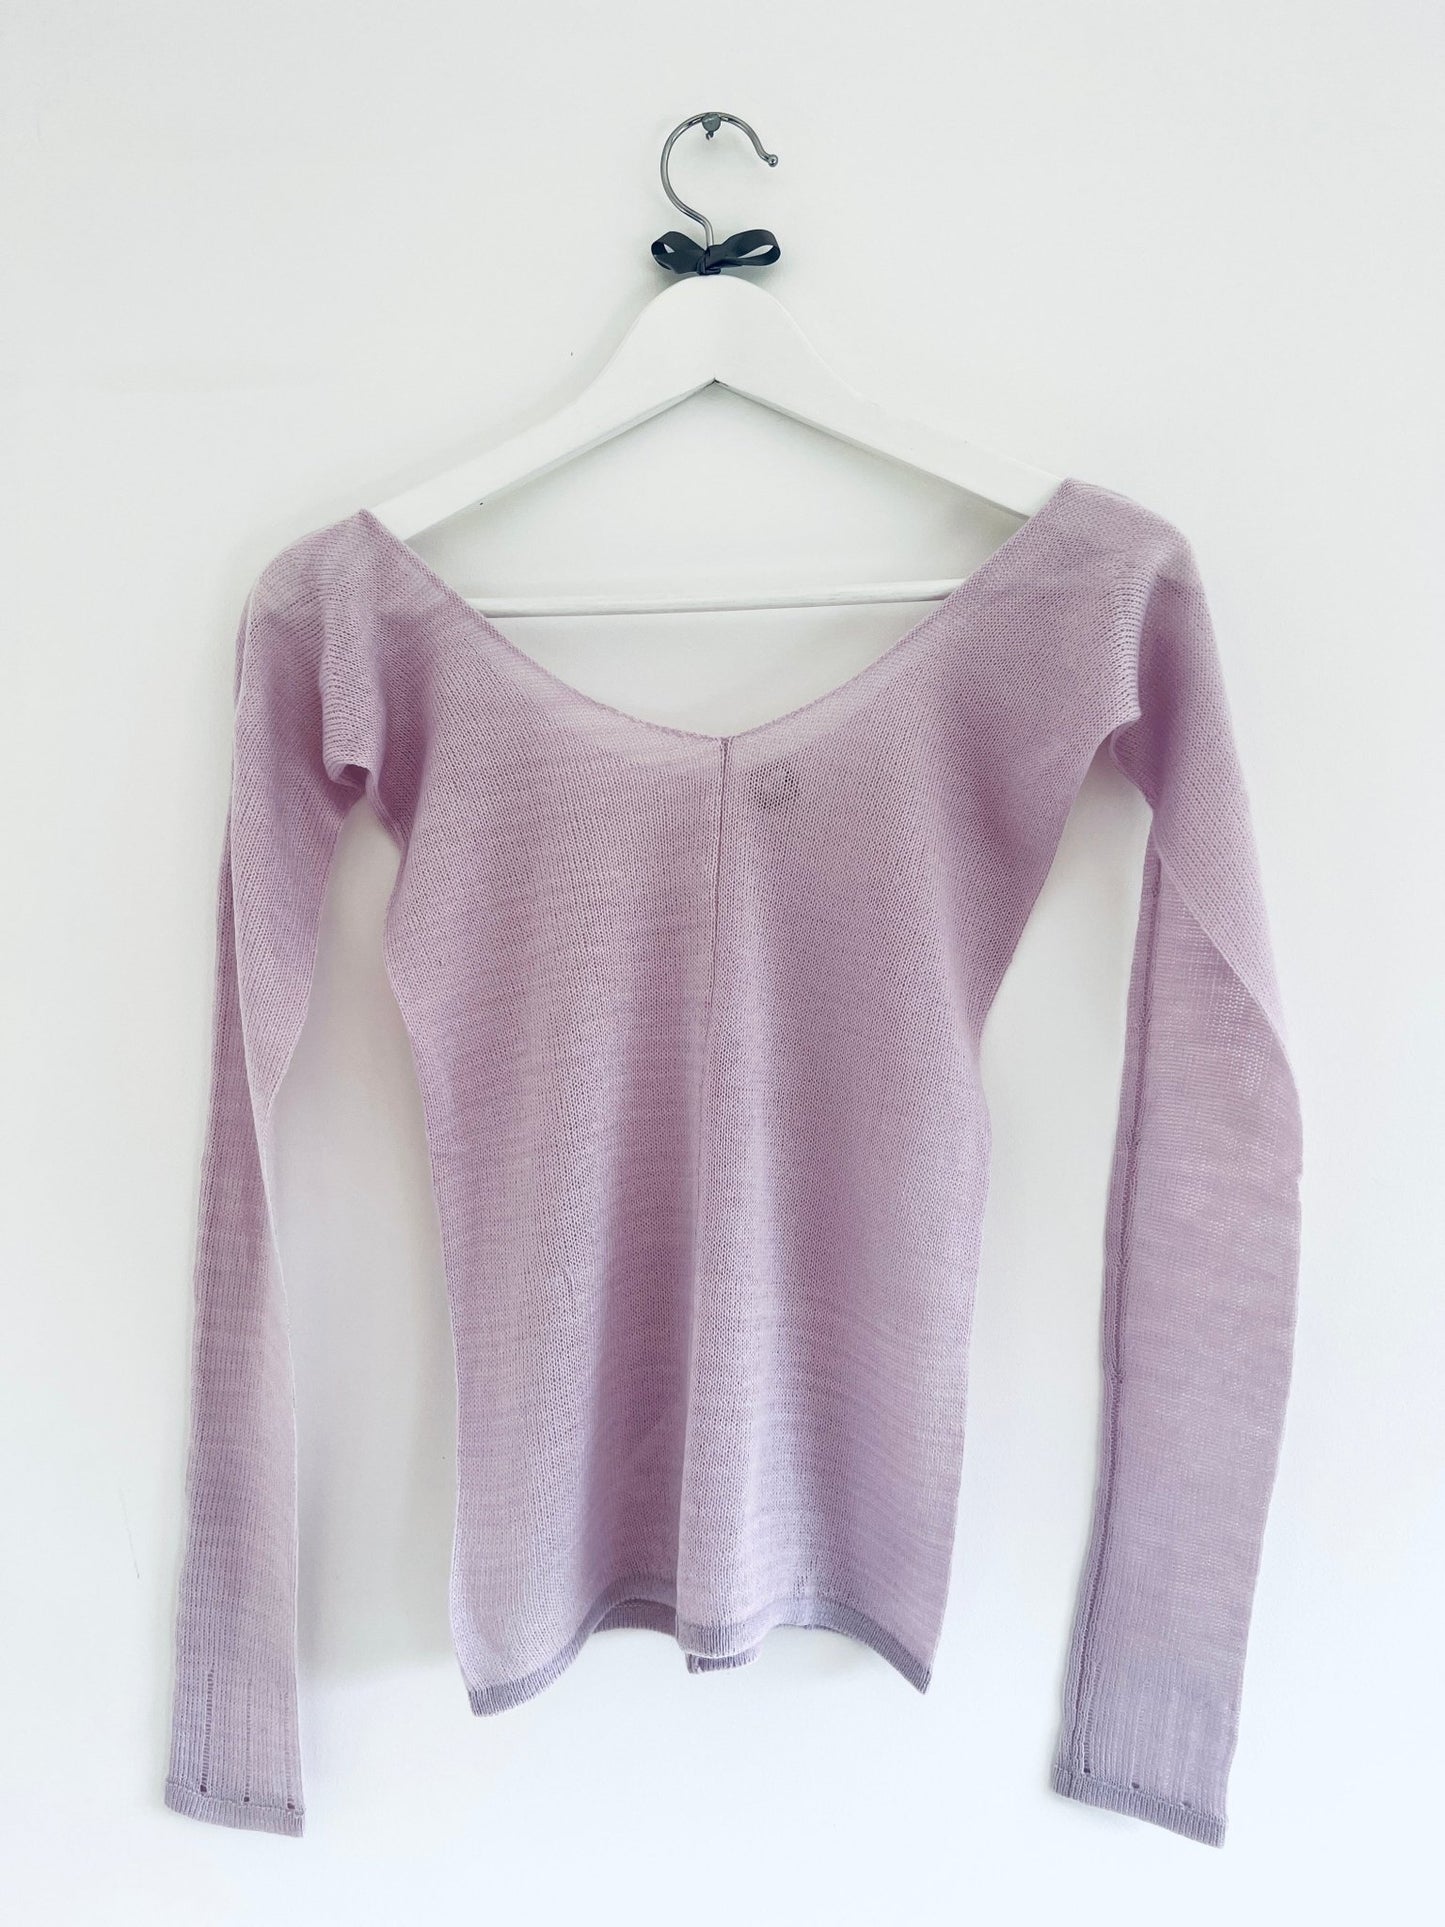 Knitted Warmup Top - Lilac - THE COLLECTIVE DANCEWEAR Knitted Warmup Top - Lilac#mWARMUPSTHE COLLECTIVE DANCEWEAR